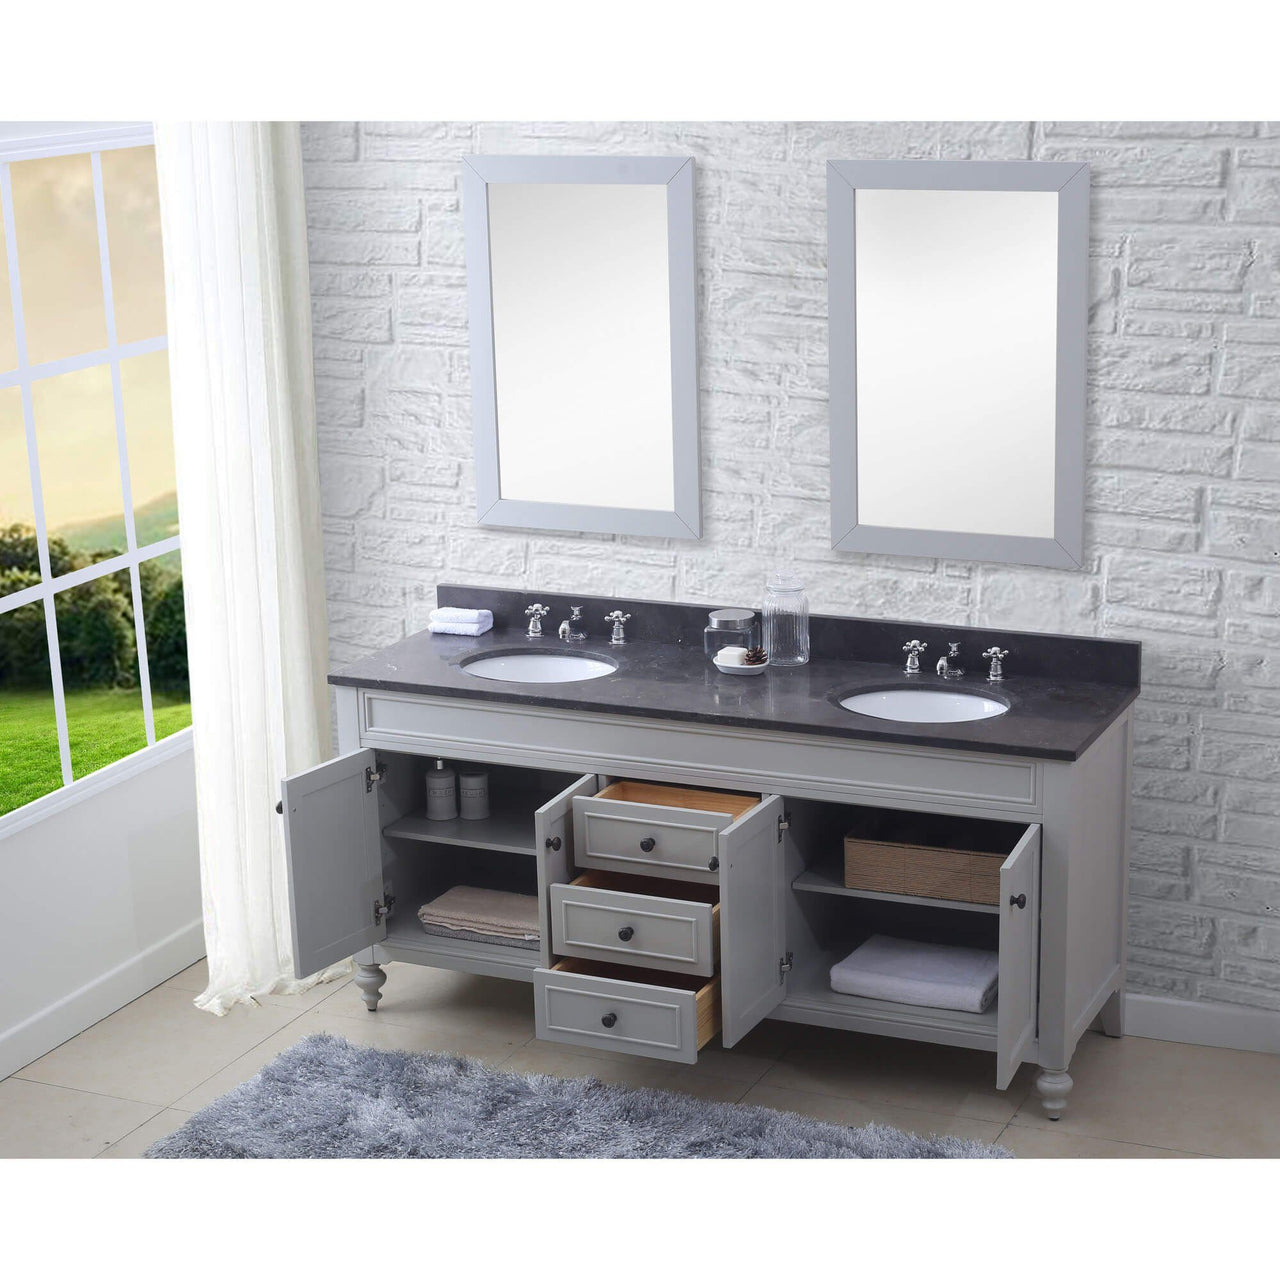 POTENZA 72" Earl Grey Double Sink Vanity With 2 Framed Mirrors And Faucets Vanity Water Creation 